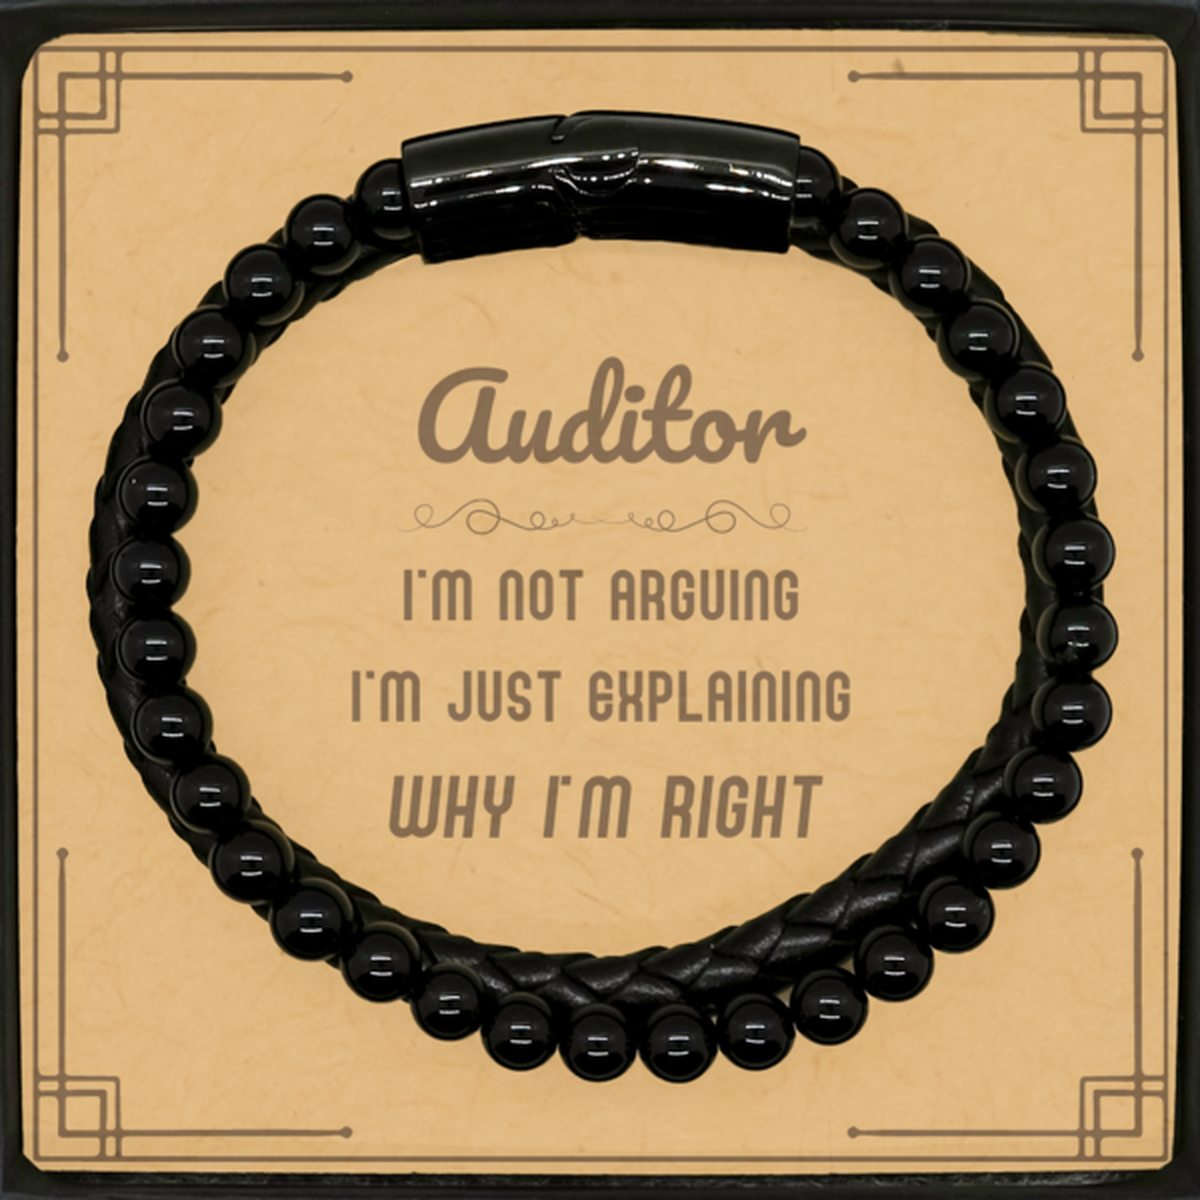 Auditor I'm not Arguing. I'm Just Explaining Why I'm RIGHT Stone Leather Bracelets, Funny Saying Quote Auditor Gifts For Auditor Message Card Graduation Birthday Christmas Gifts for Men Women Coworker